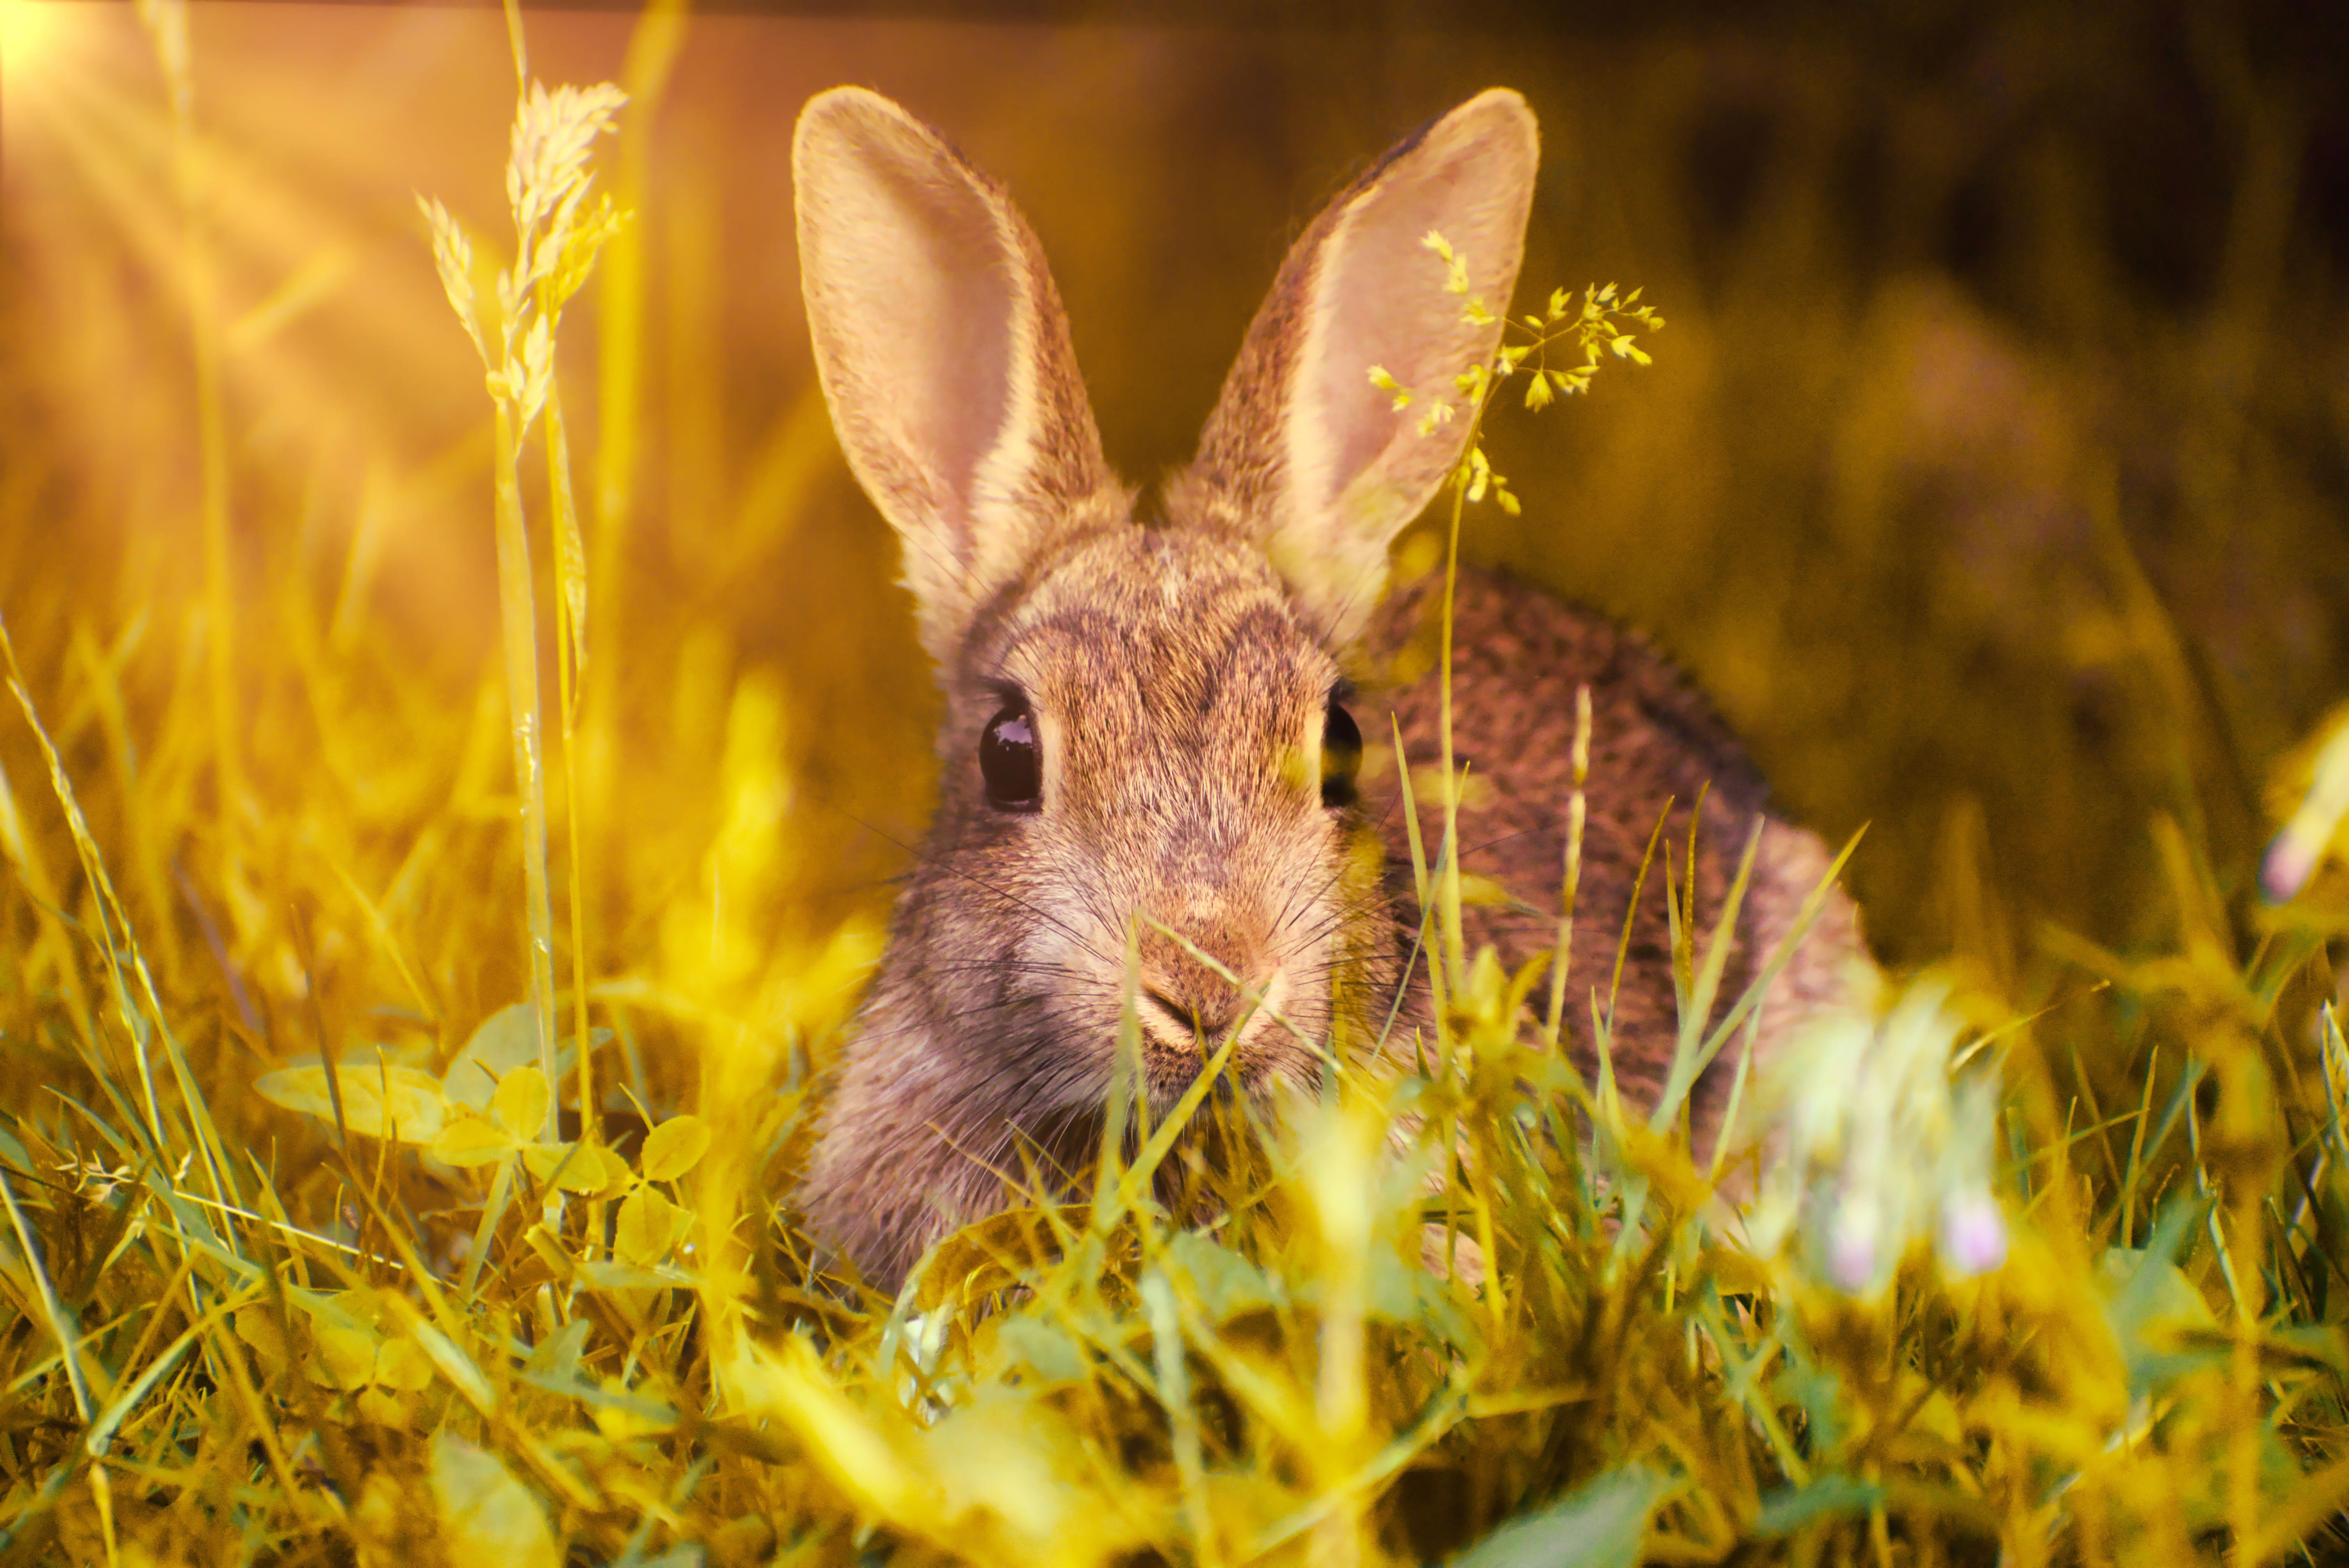 Living Harmoniously: Co-Habitating with Pet Rabbits and Other Animals